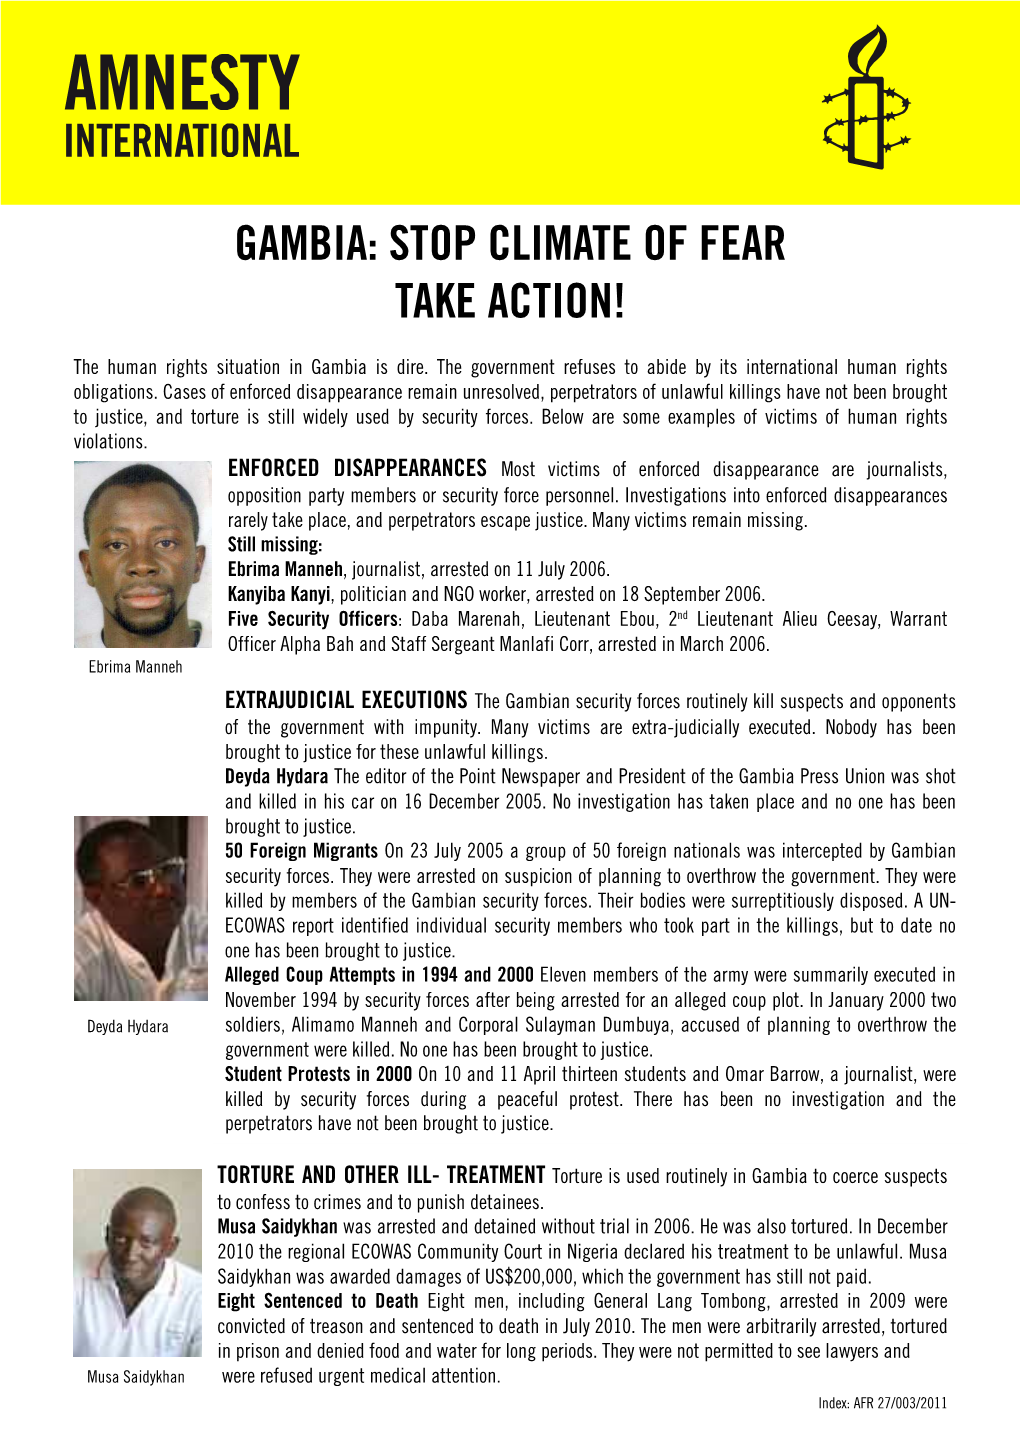 Gambia: Stop Climate of Fear Take Action!